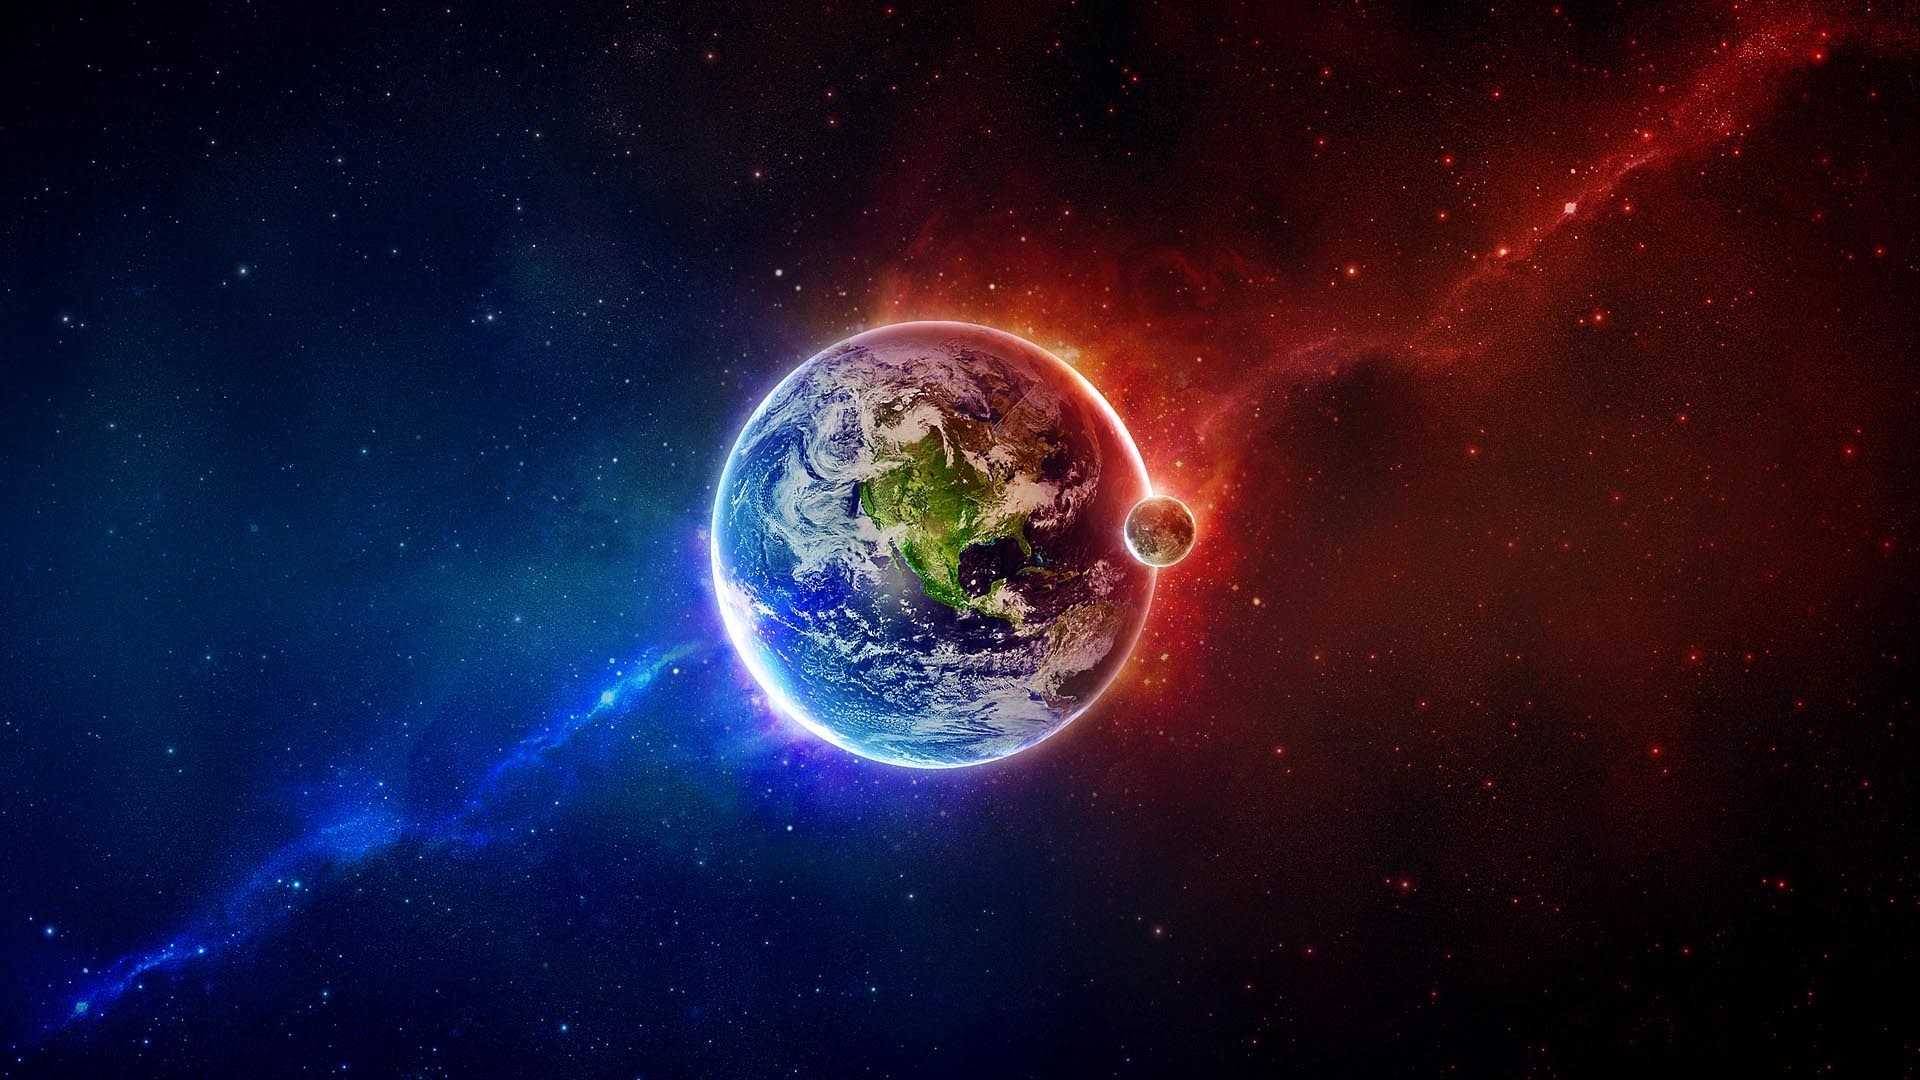 High resolution wallpapers 1920 x 1080 px Cool earth space backround by  Edward Robertson for  TrunkWeedcom